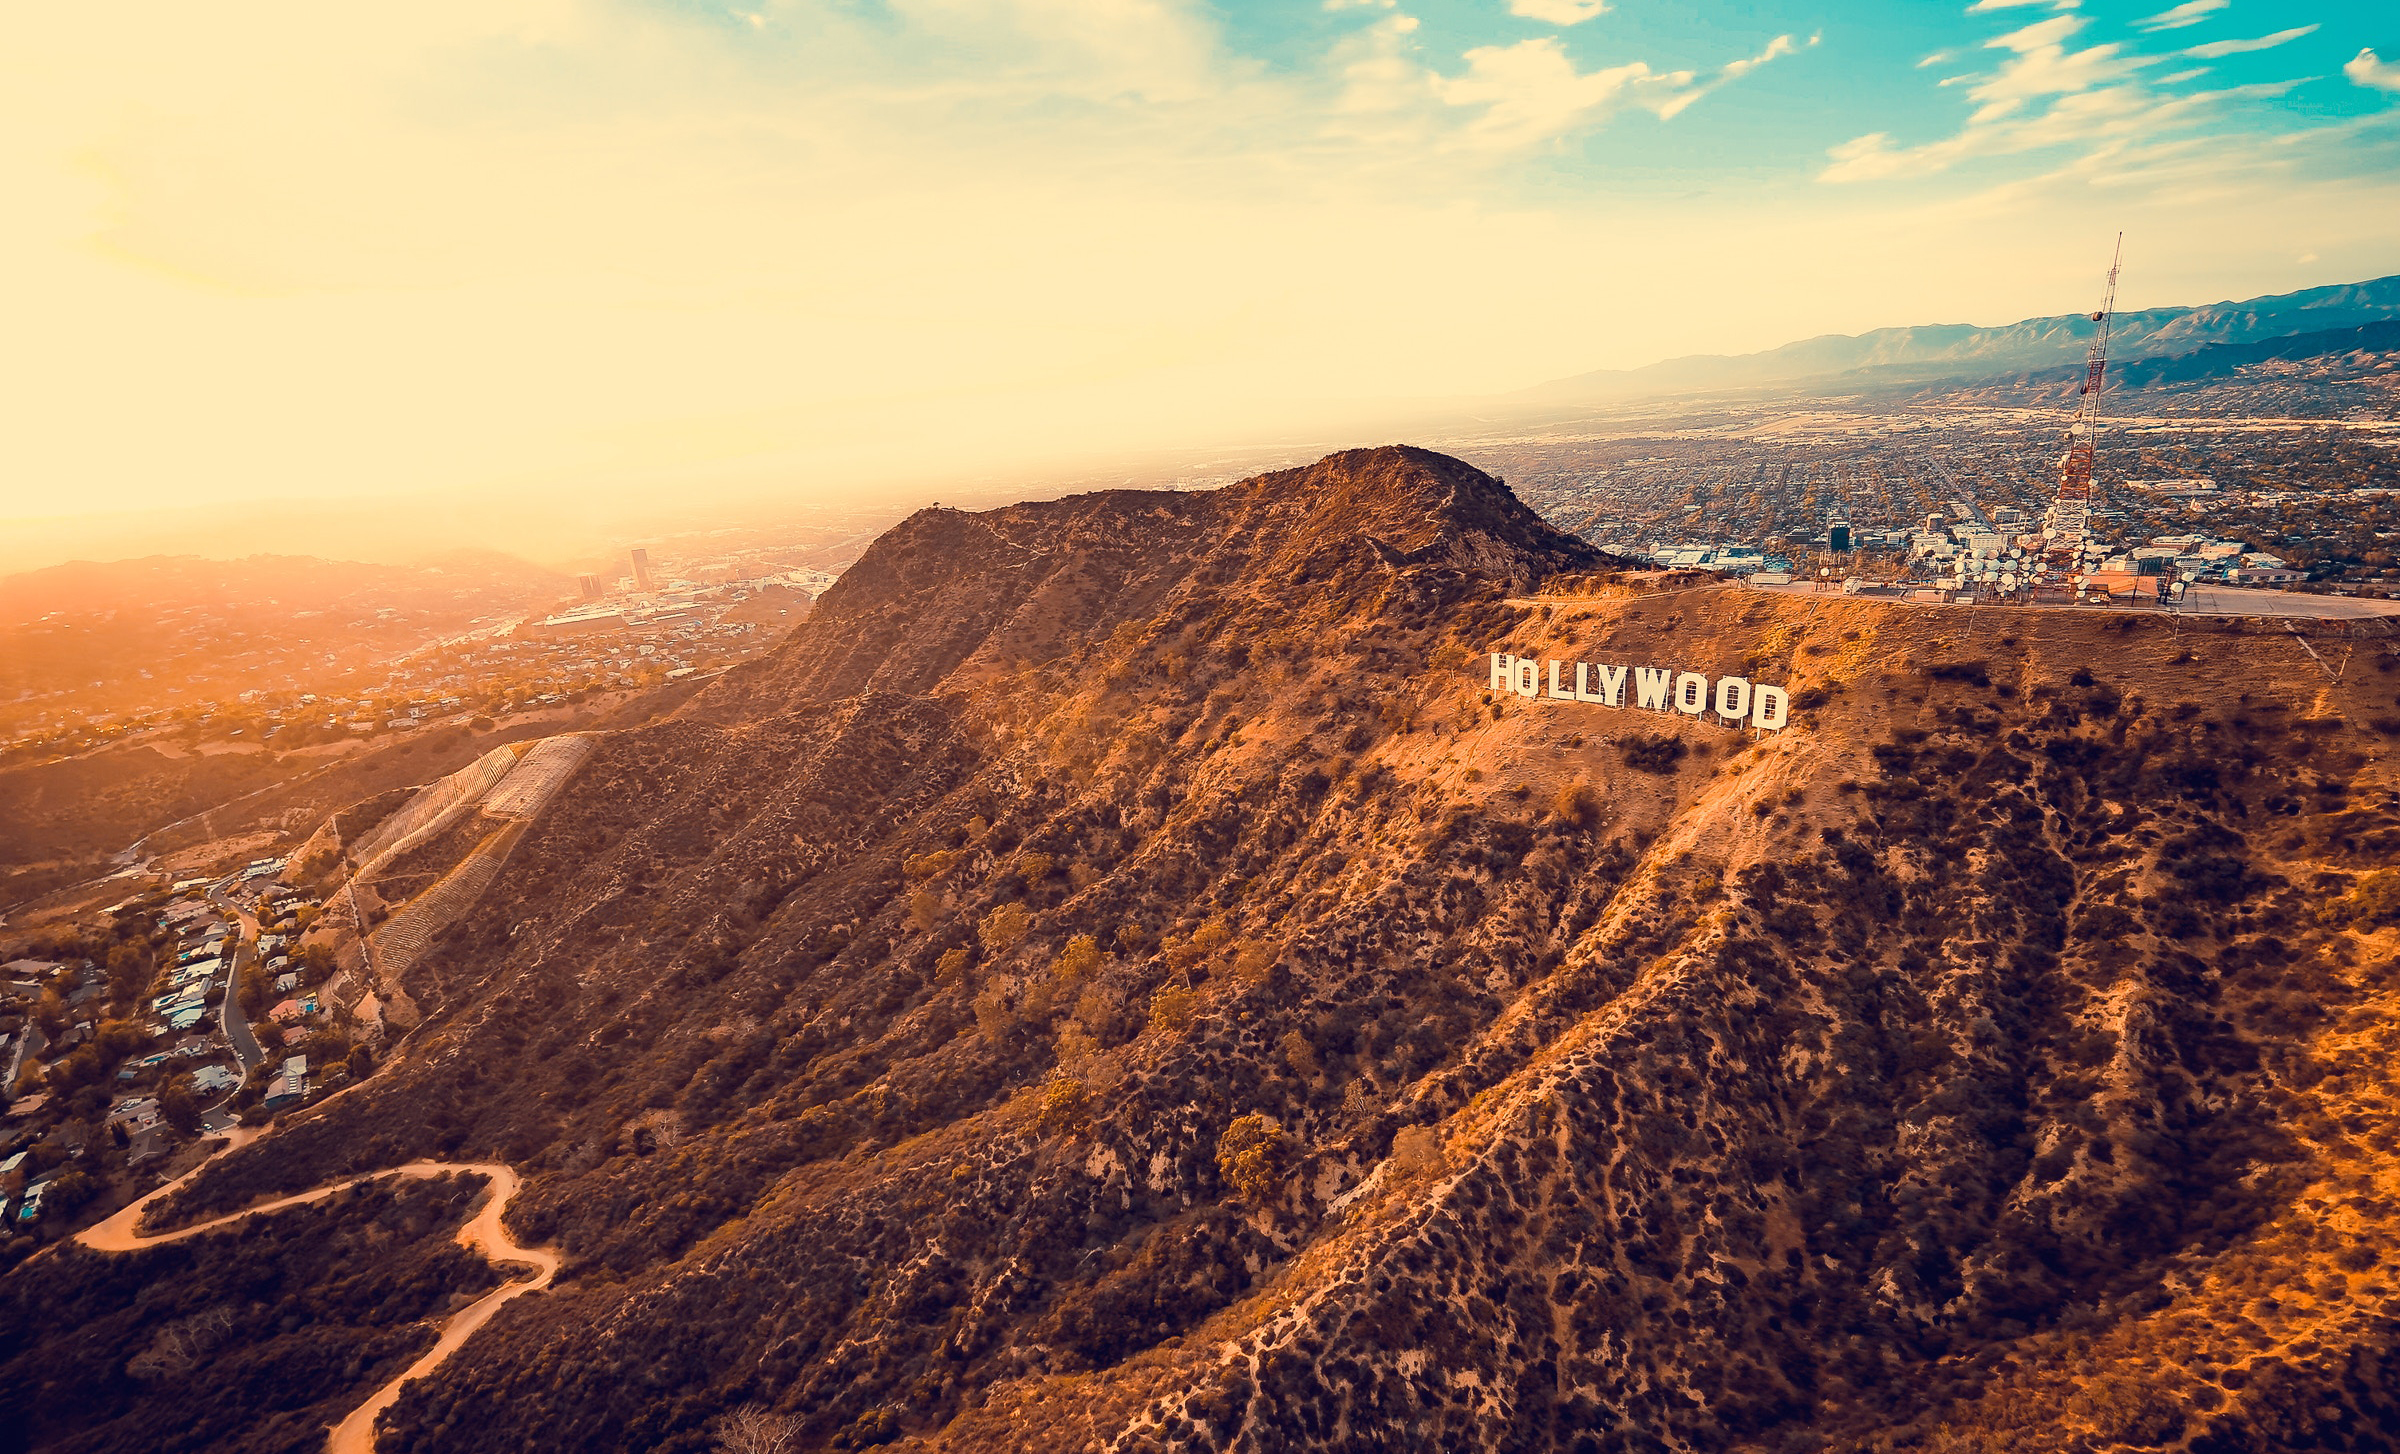 Los Angeles Hollywood Sign at sunset.